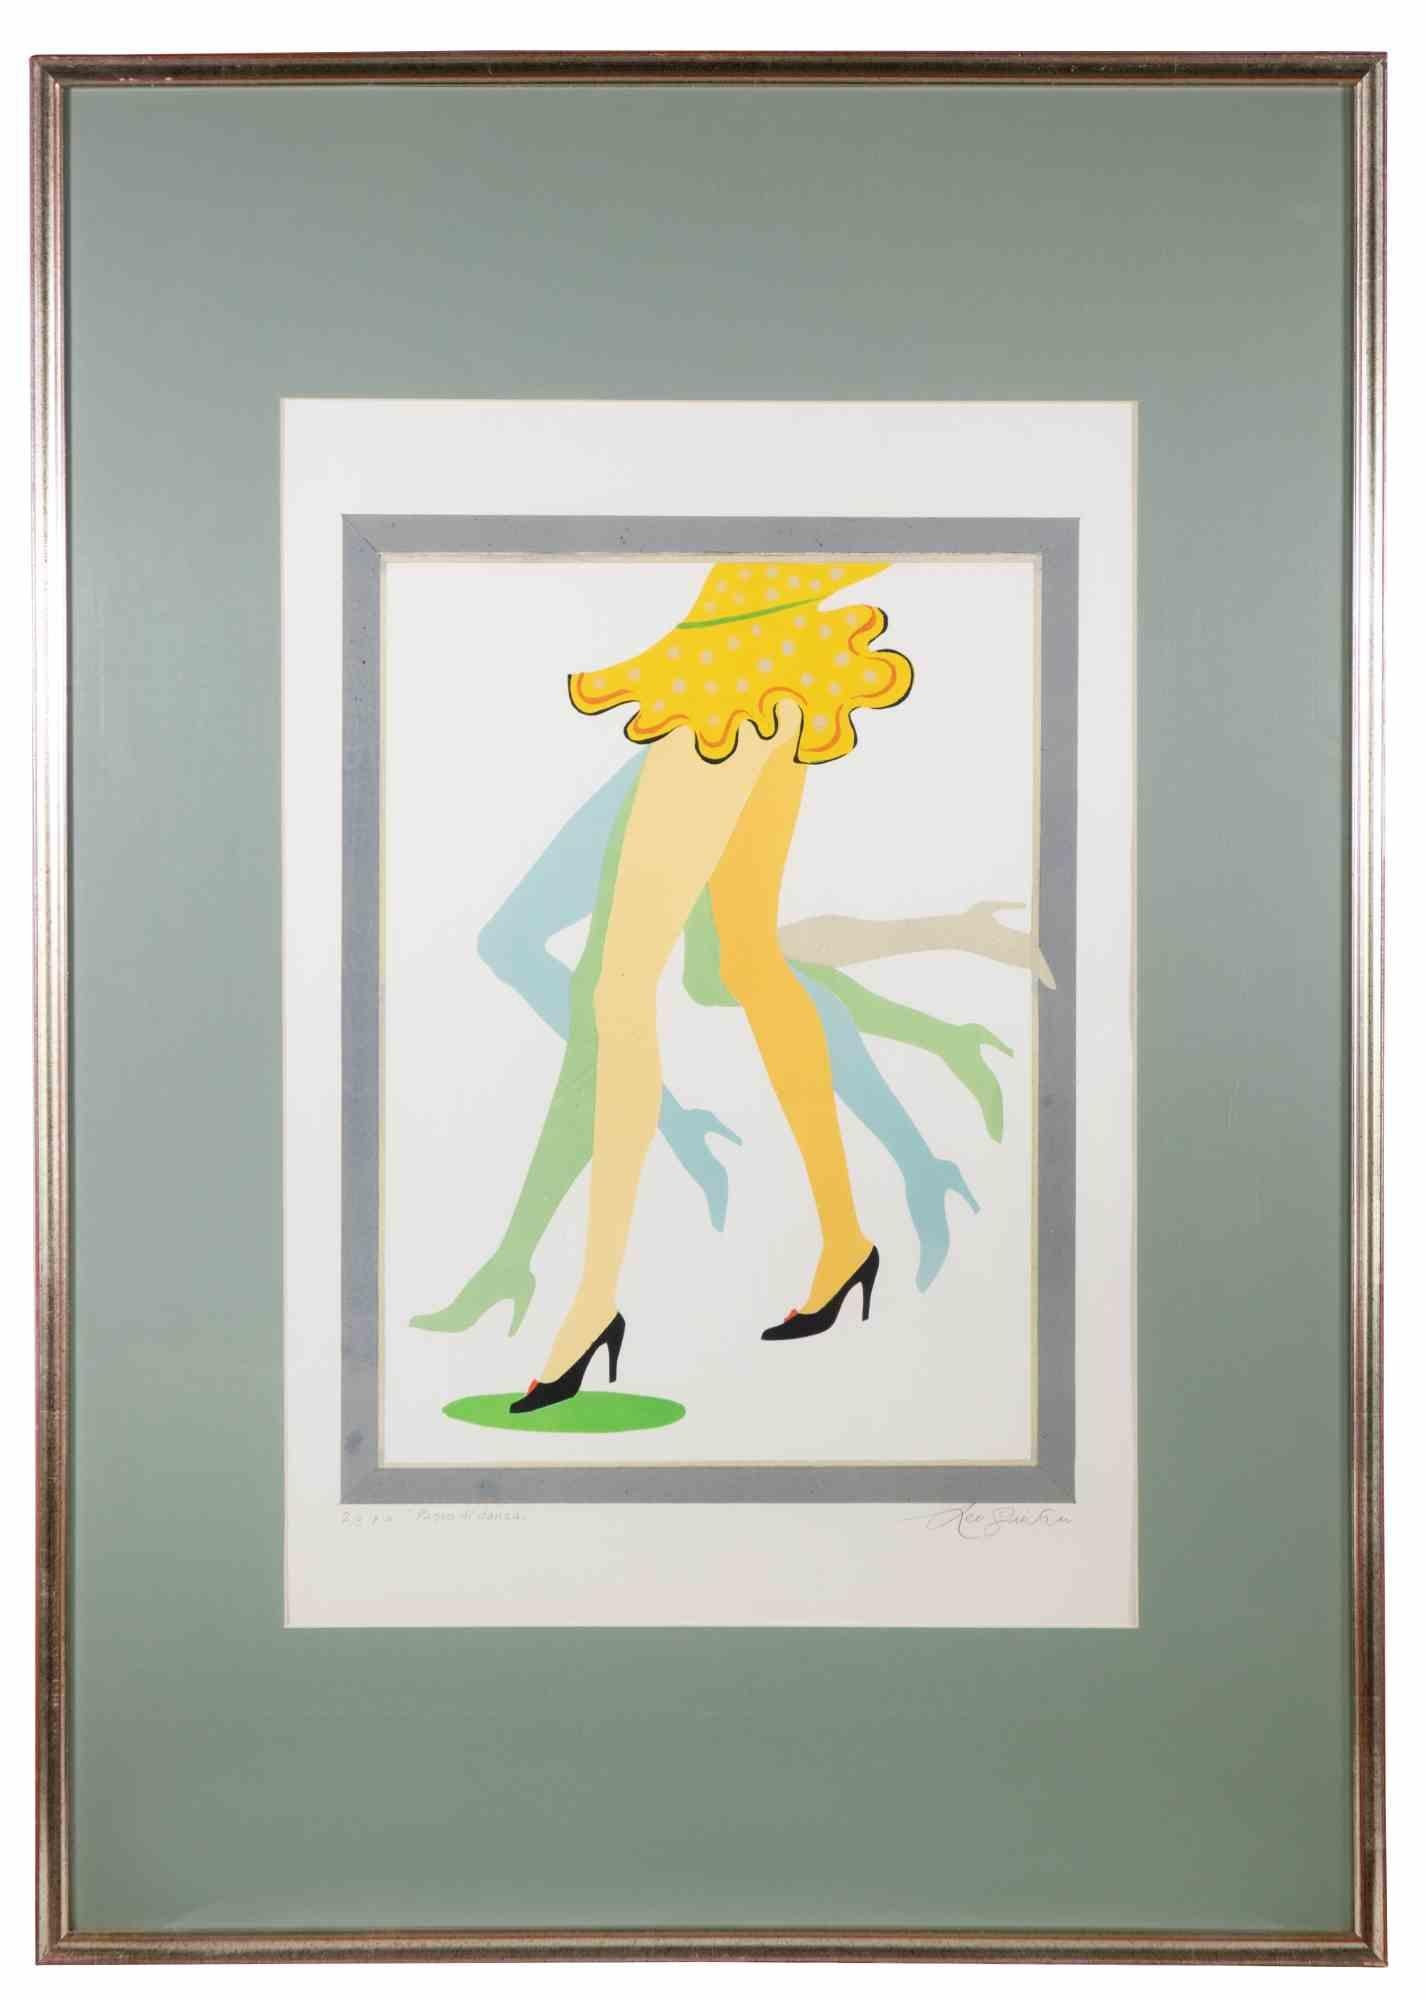 Dance Step - Lithograph by Leo Guida - 1975 For Sale 2